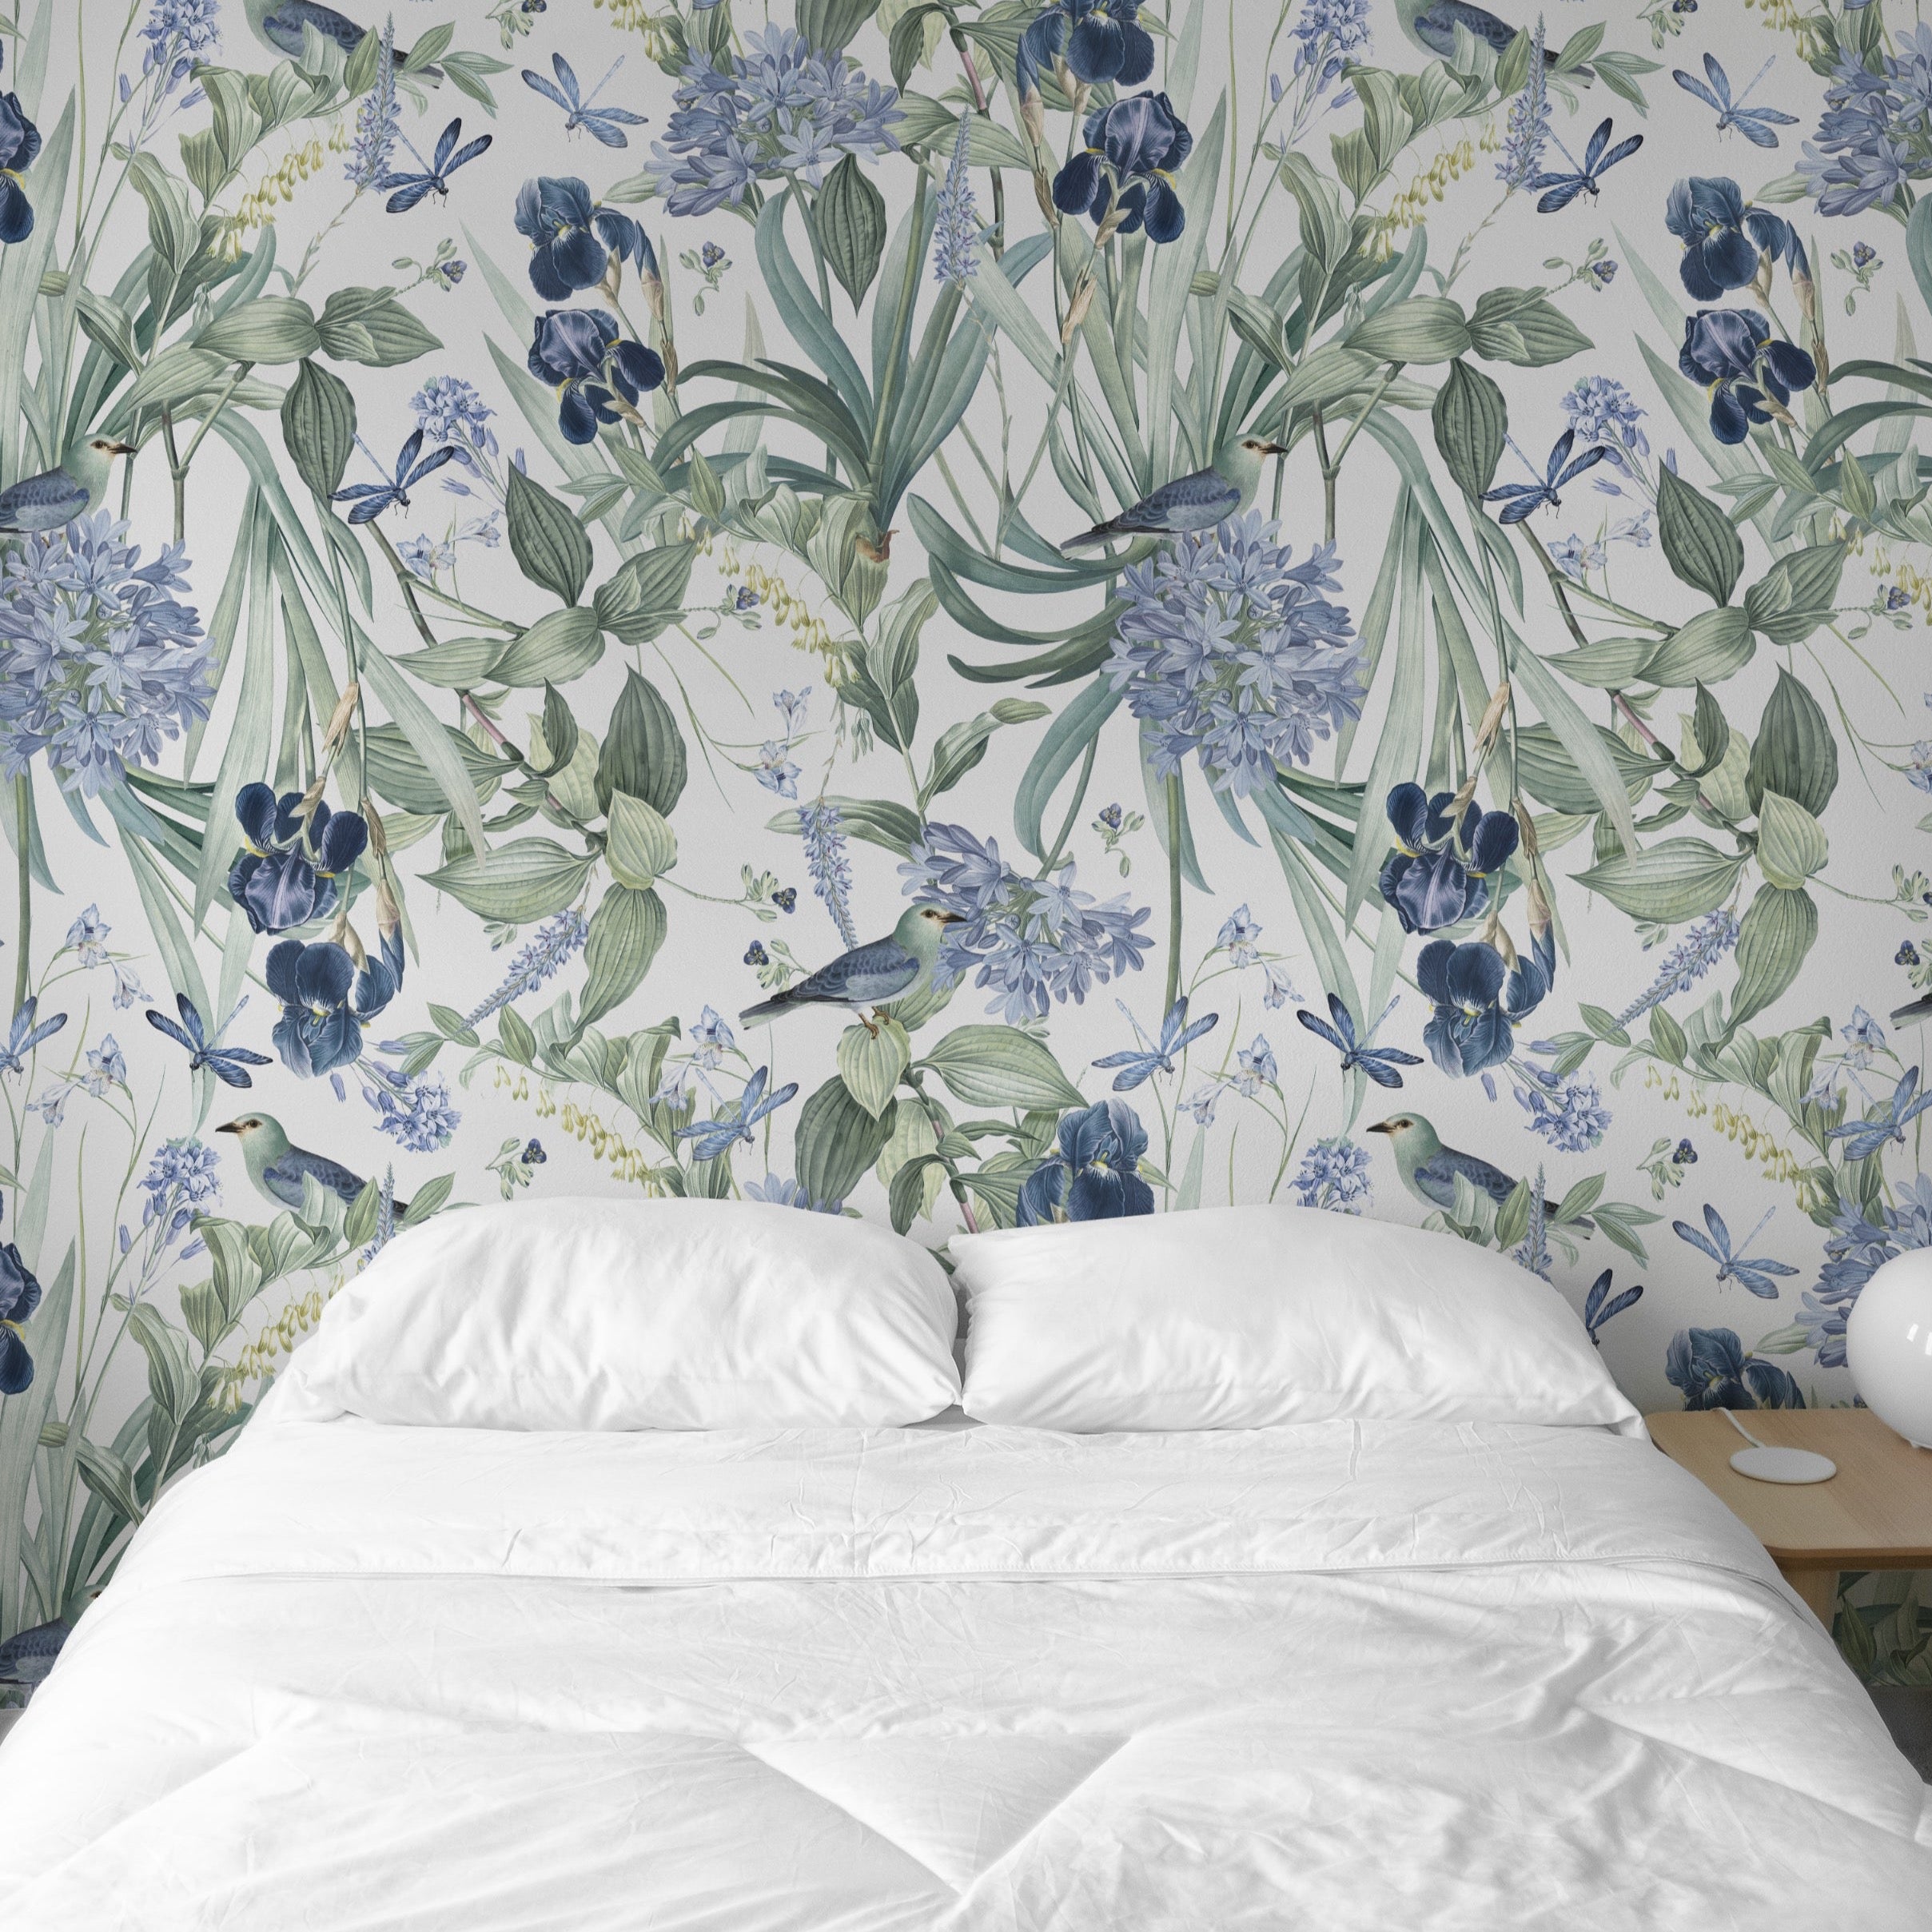 A serene bedroom scene with the 'Mint Floral Wallpaper - 50"' serving as an exquisite backdrop to a simple white bed, emphasizing the wallpaper’s ability to add a tranquil and decorative touch to a sleeping area.